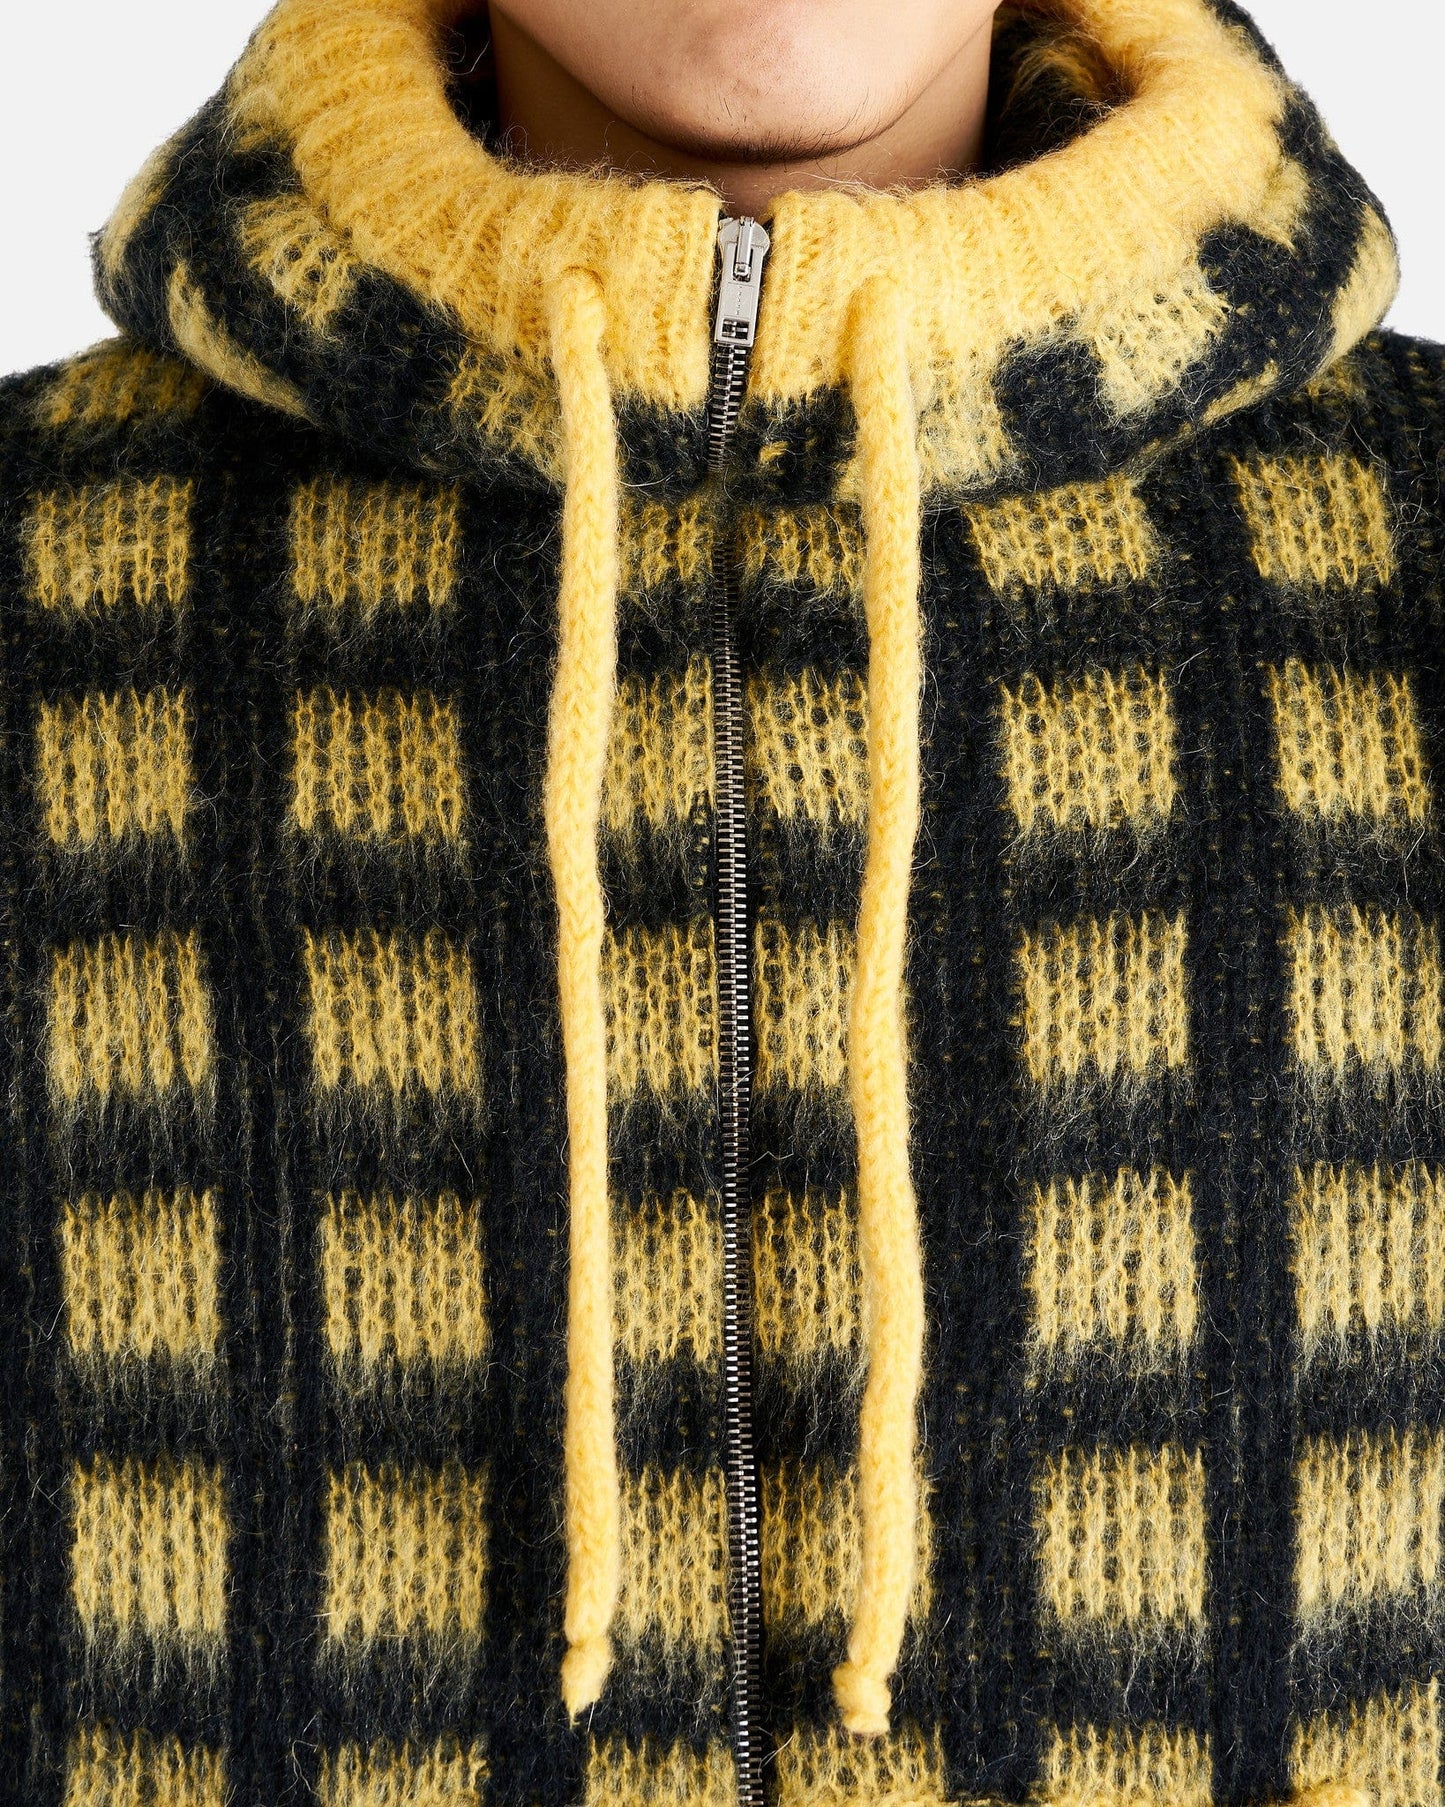 Marni Men's Sweater Brushed Check Fuzzy Wuzzy Cardigan in Maize